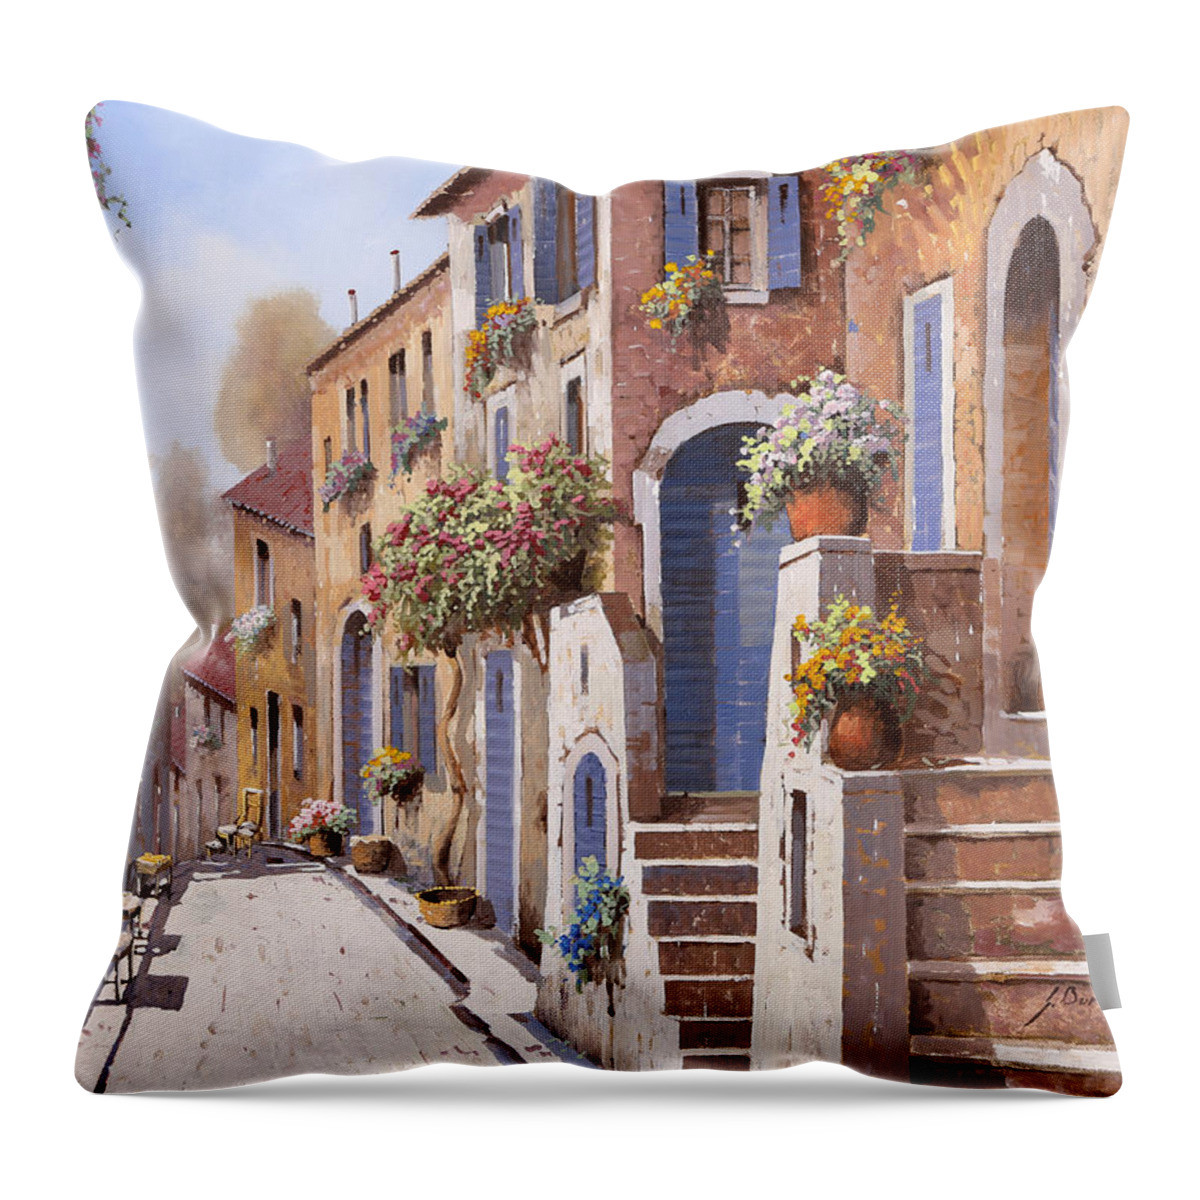 Street Scene Throw Pillow featuring the painting I Gradini Al Sole by Guido Borelli